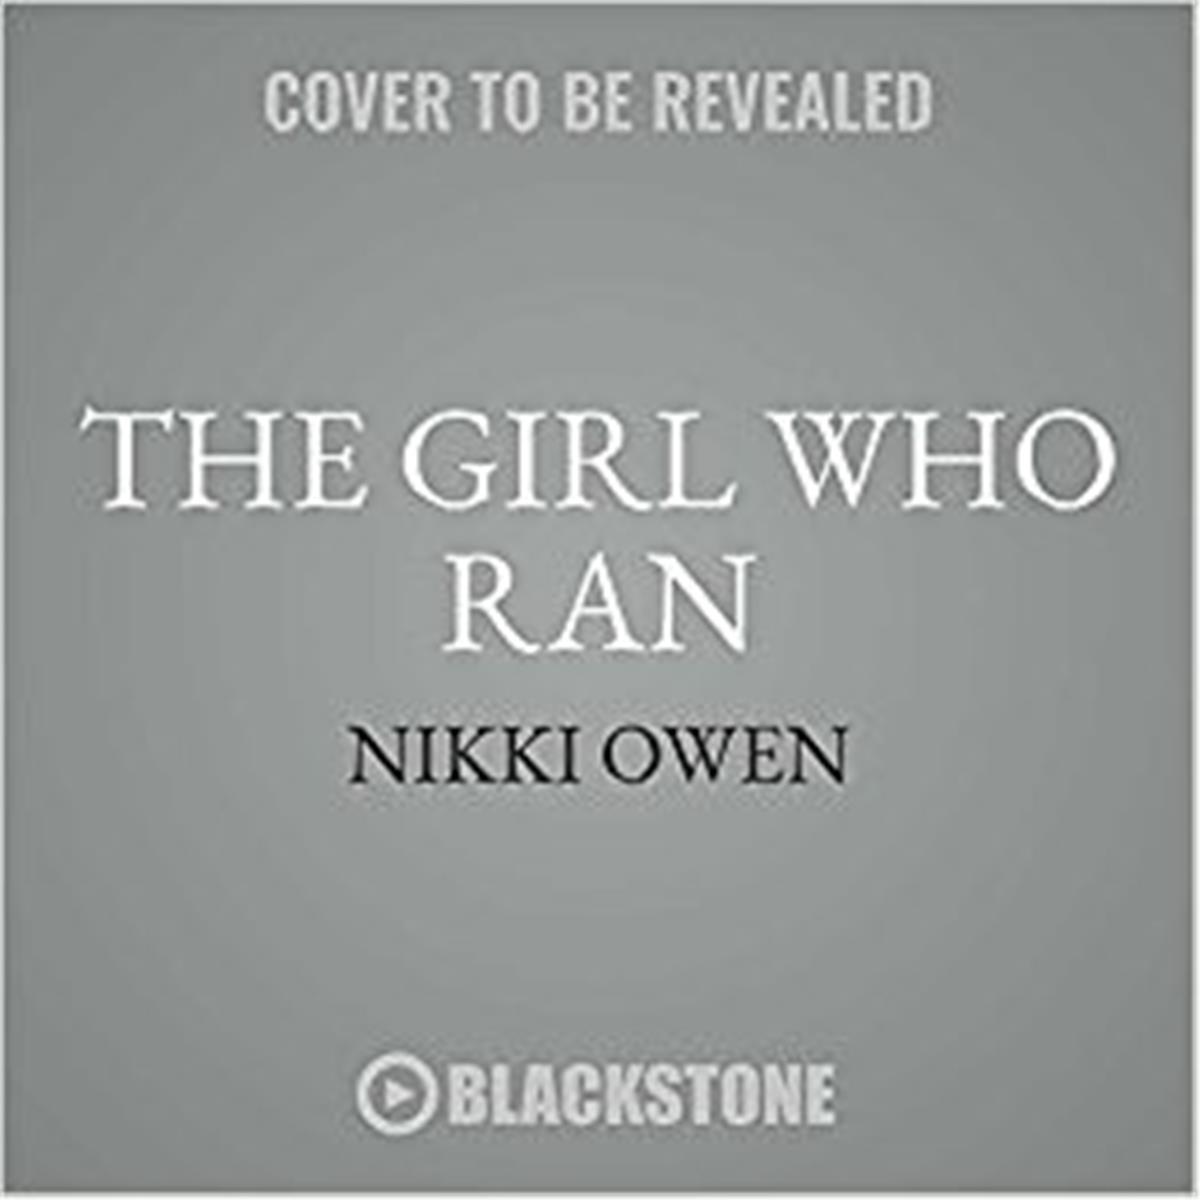 Picture of Blackstone Audio 9781504780674 The Girl Who Ran Book